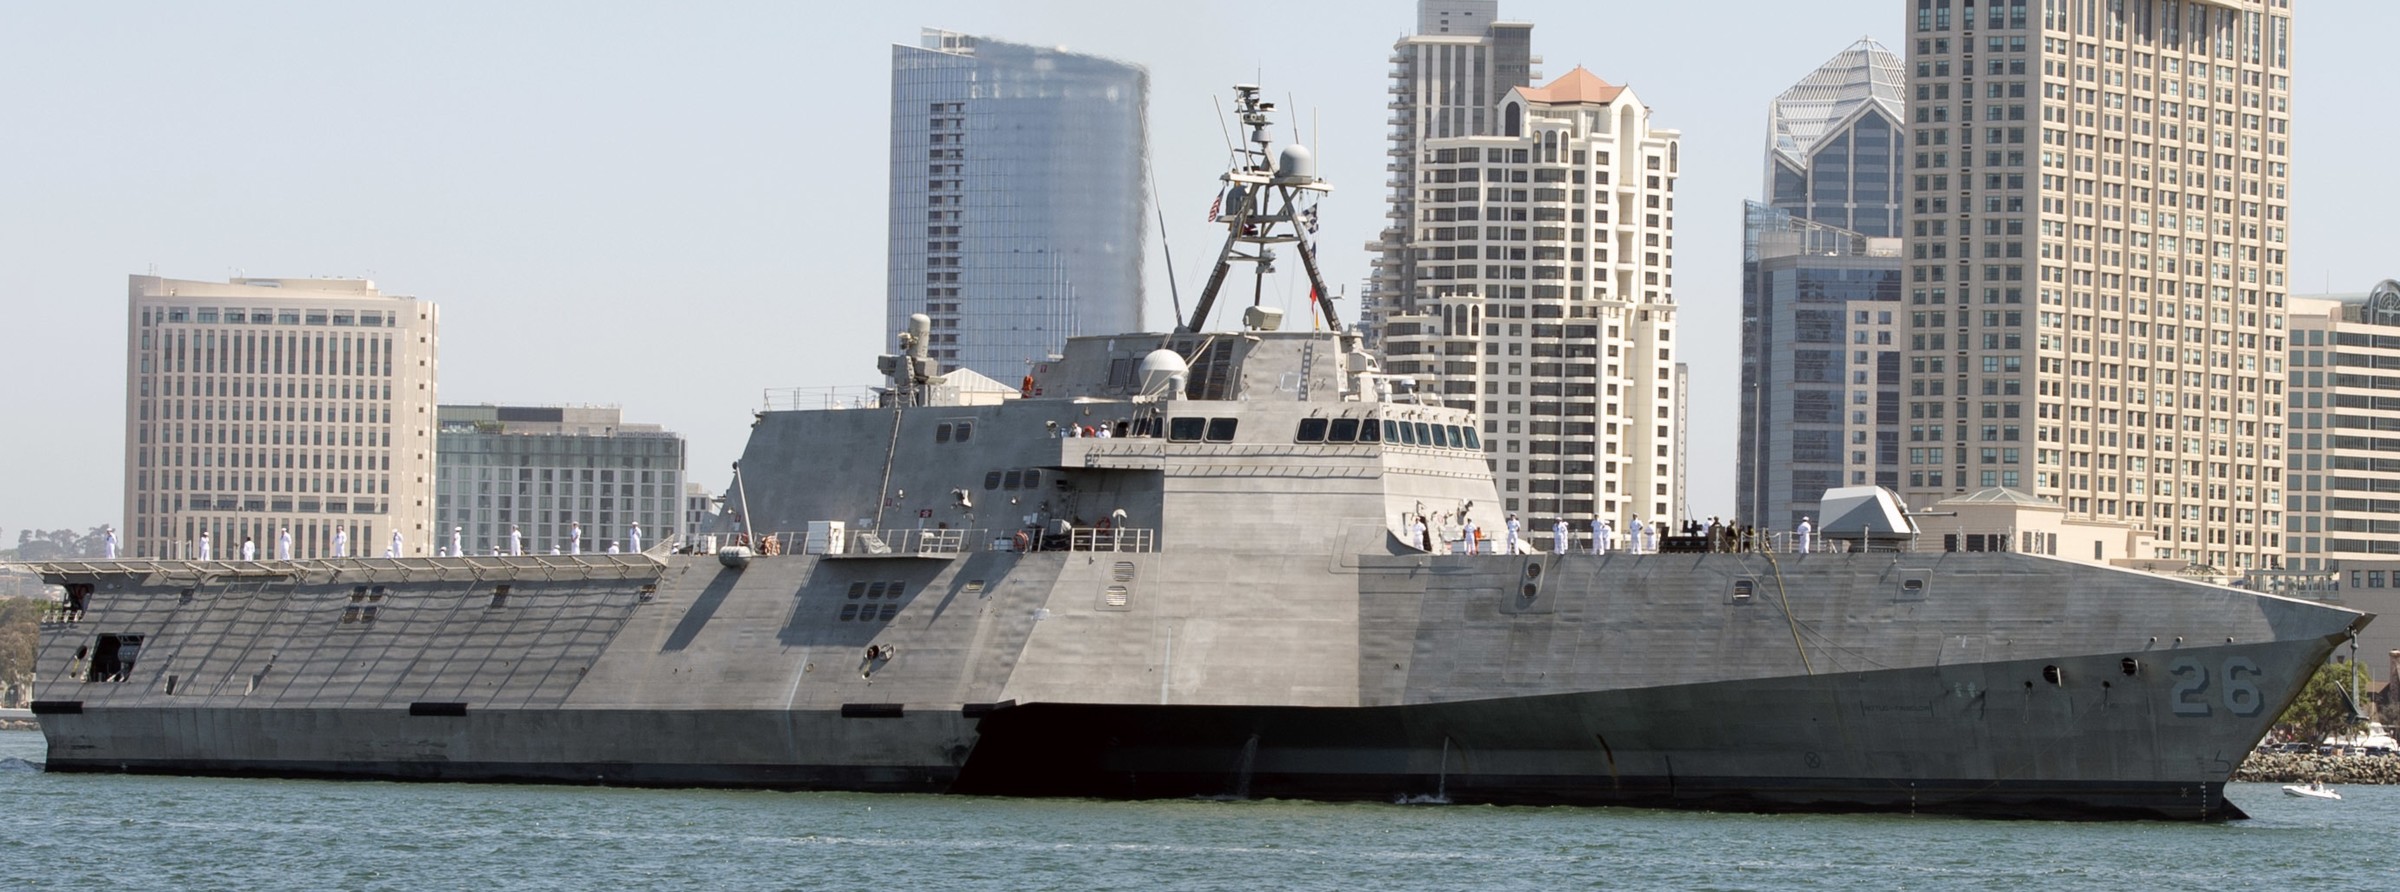 lcs-26 uss mobile independence class littoral combat ship us navy san diego california 13